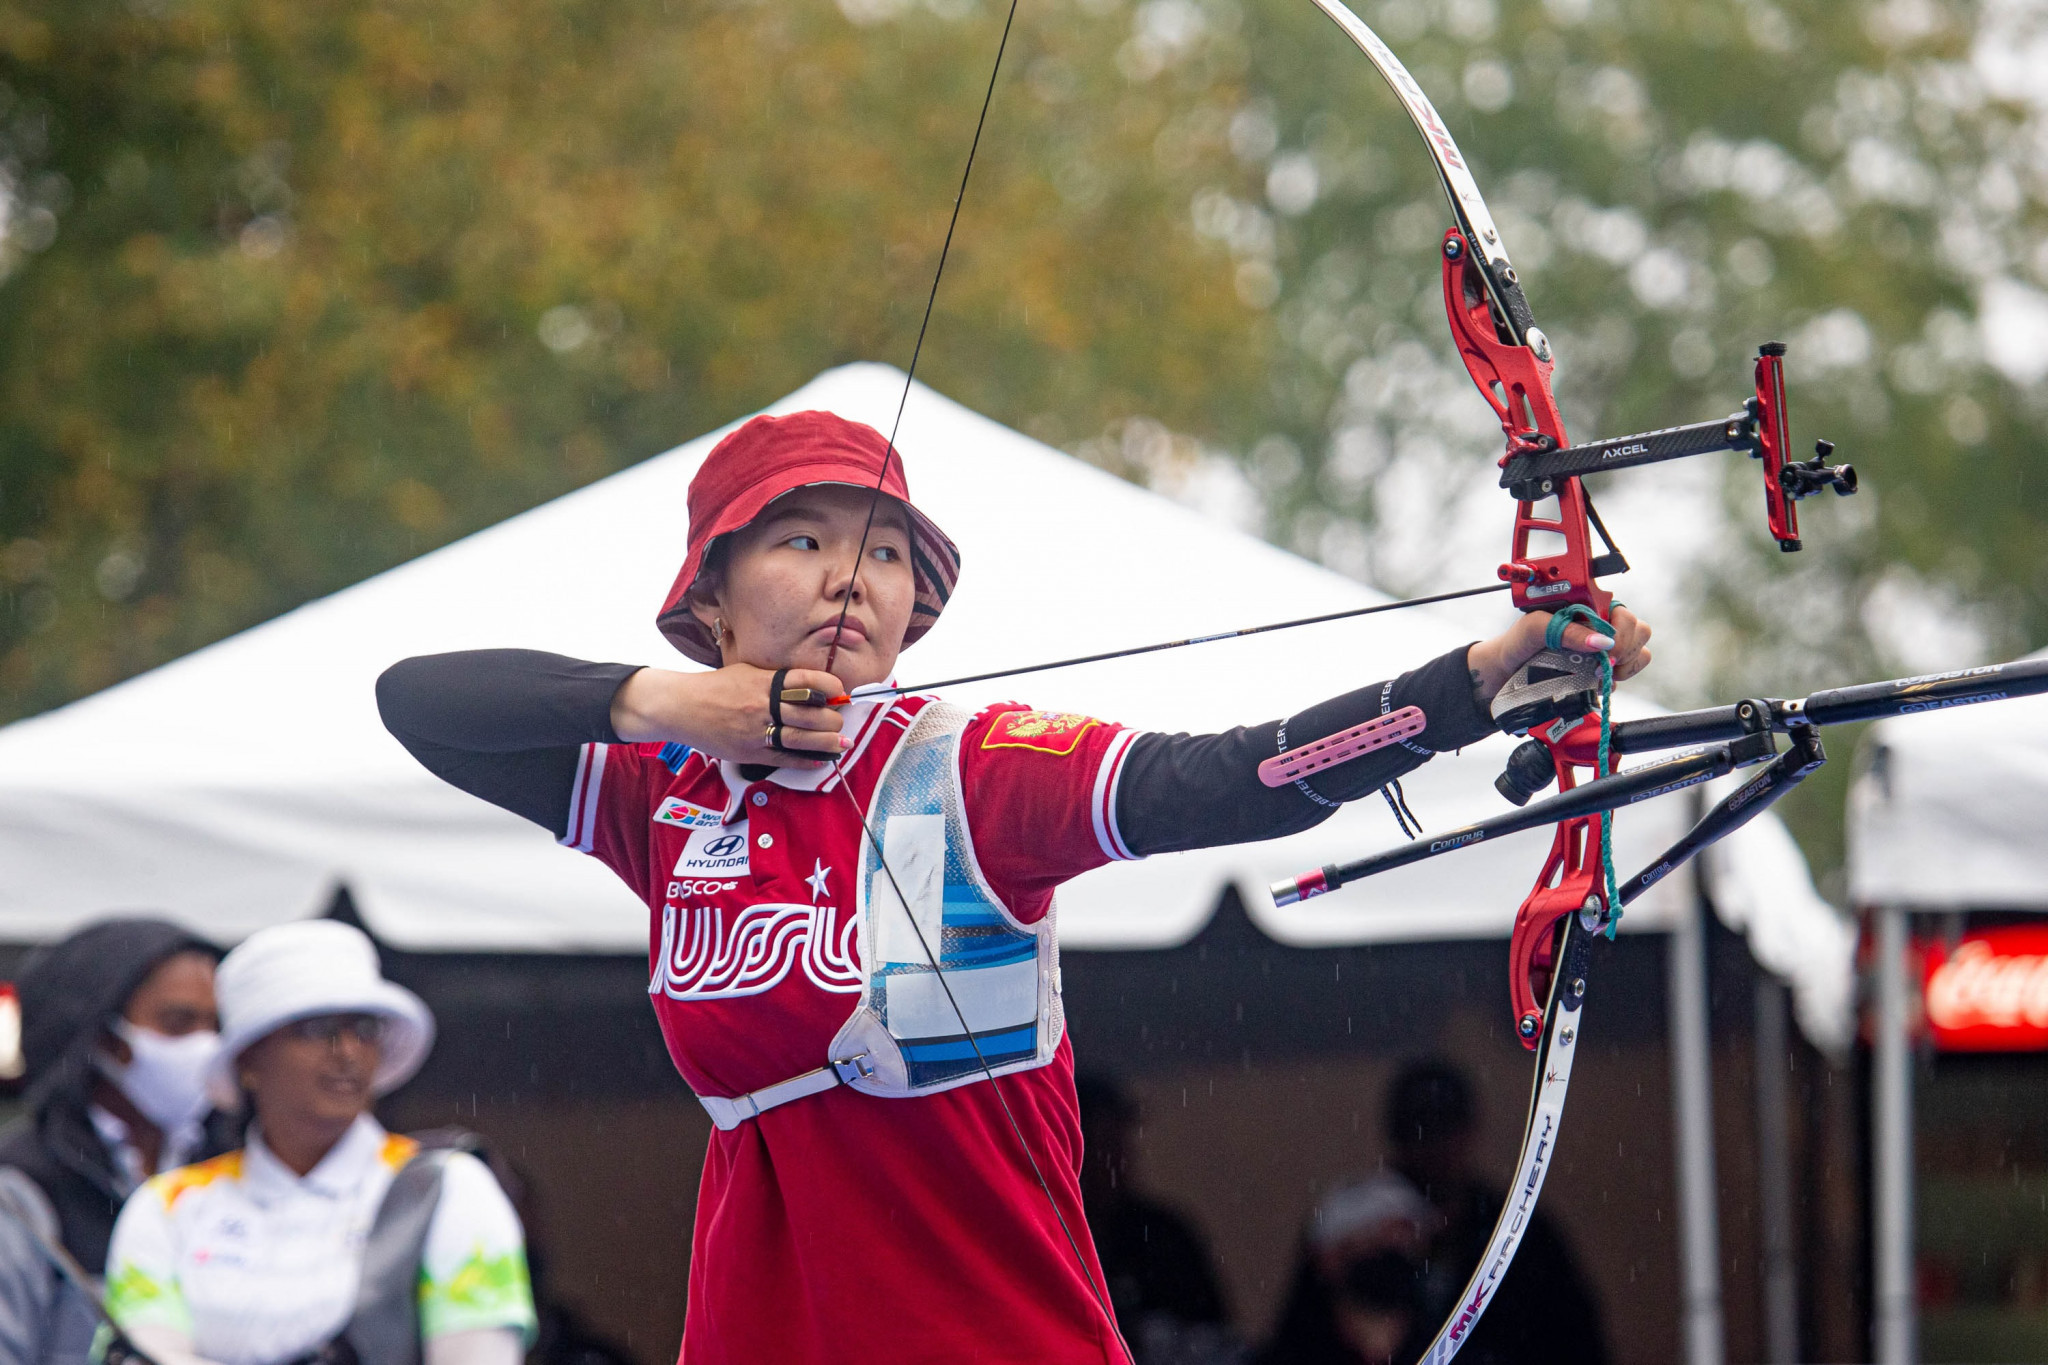 The World Archery Championships is among several major sporting events that are set to be held in Germany this year ©Getty Images